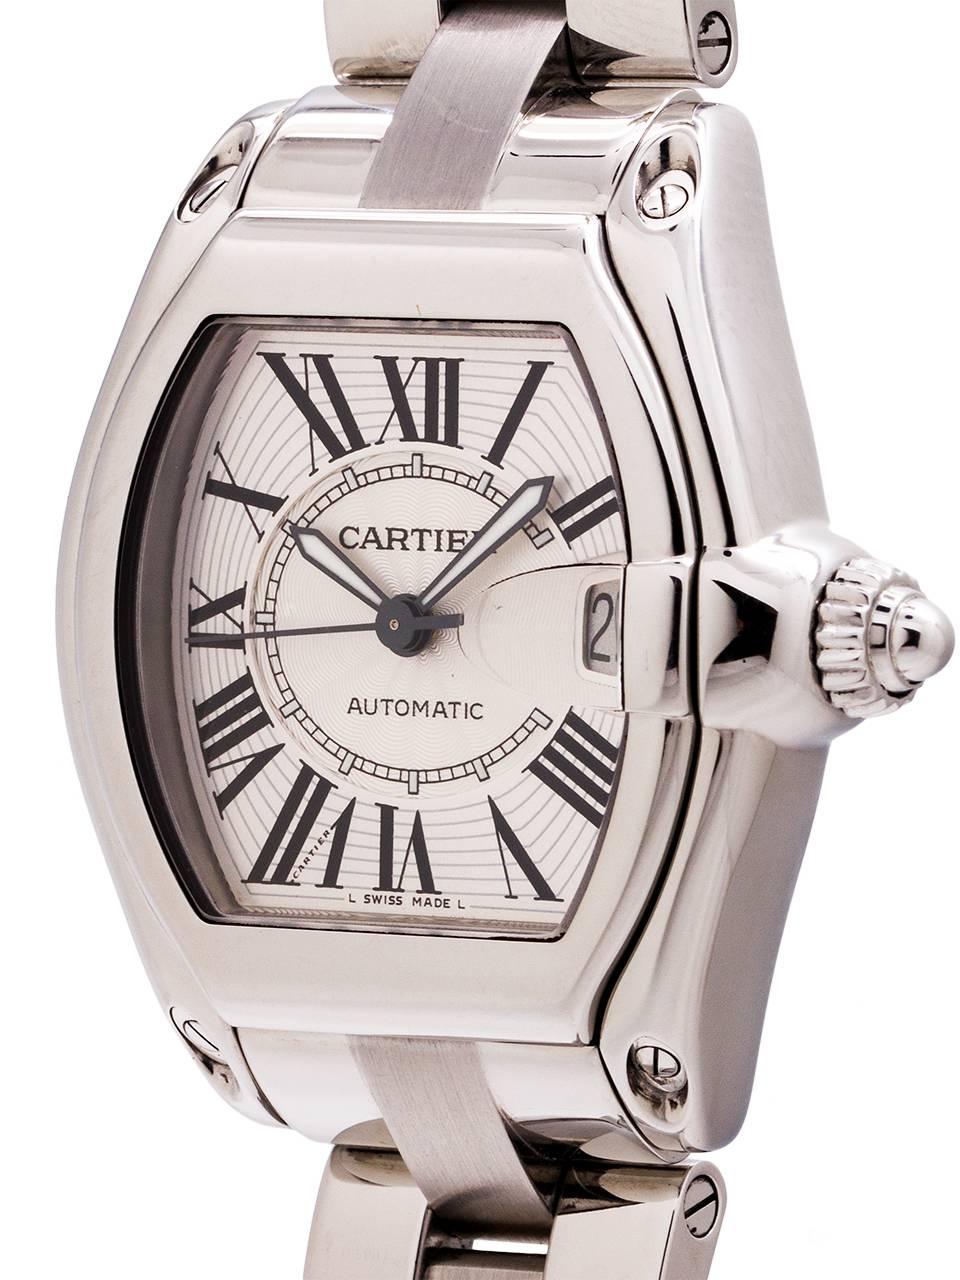 
Cartier Man’s Roadster automatic ref# 2510 circa 2000s. 38 x 44.5mm tonneau shaped Stainless Steel case with steel cabochon style screw down crown, matte silvered textured dial with black stretch Roman numerals, and black outline kite shaped